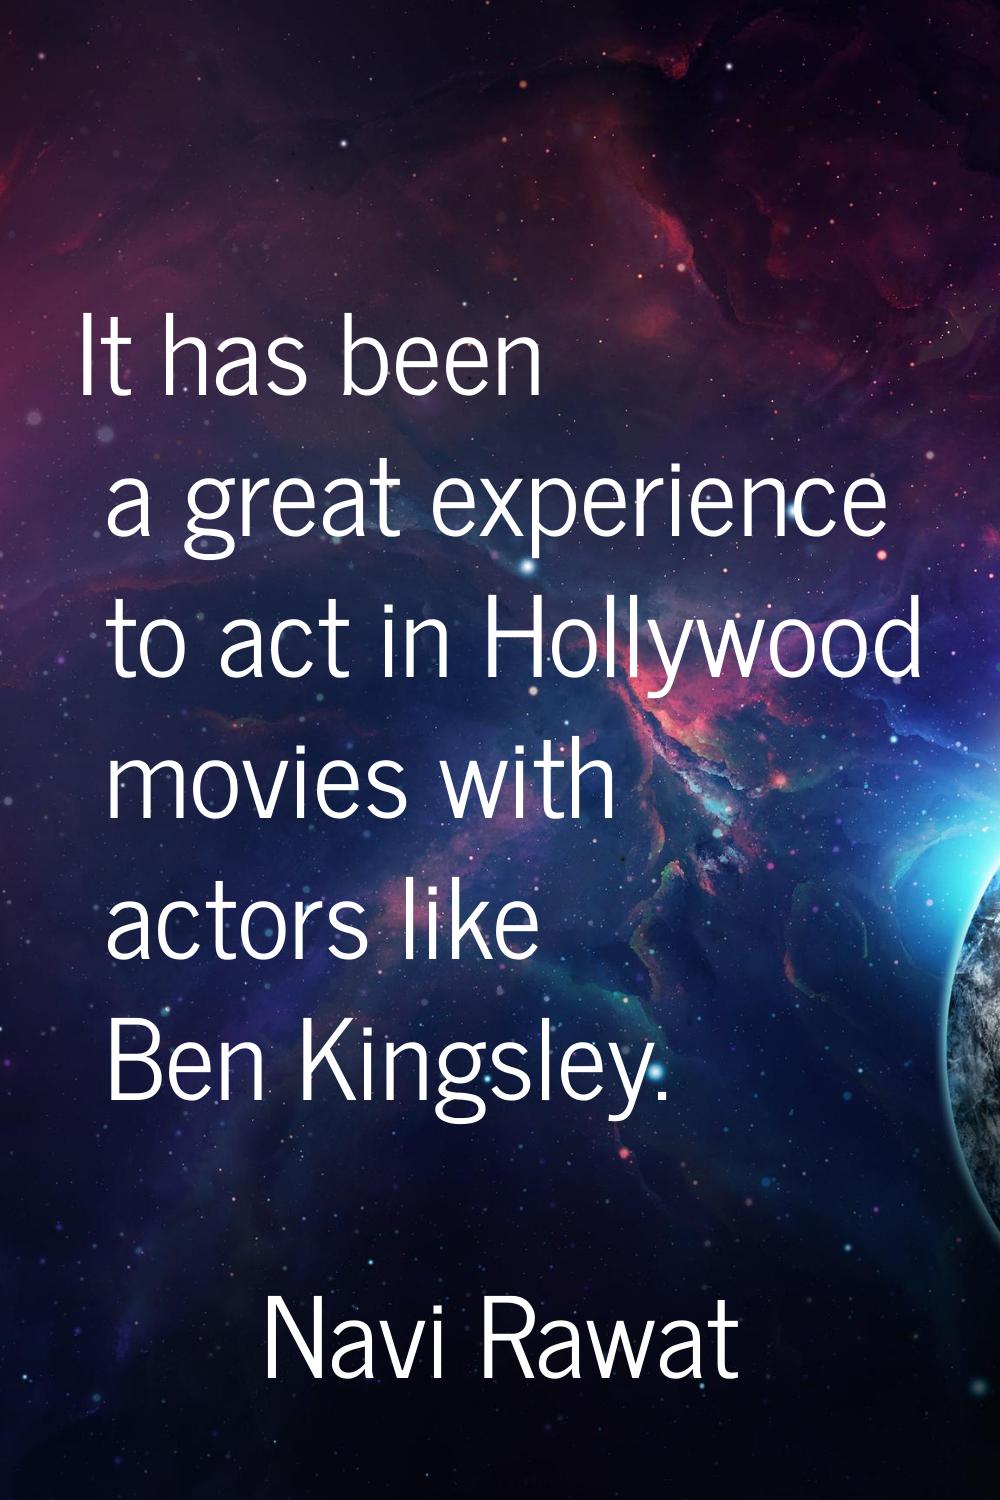 It has been a great experience to act in Hollywood movies with actors like Ben Kingsley.